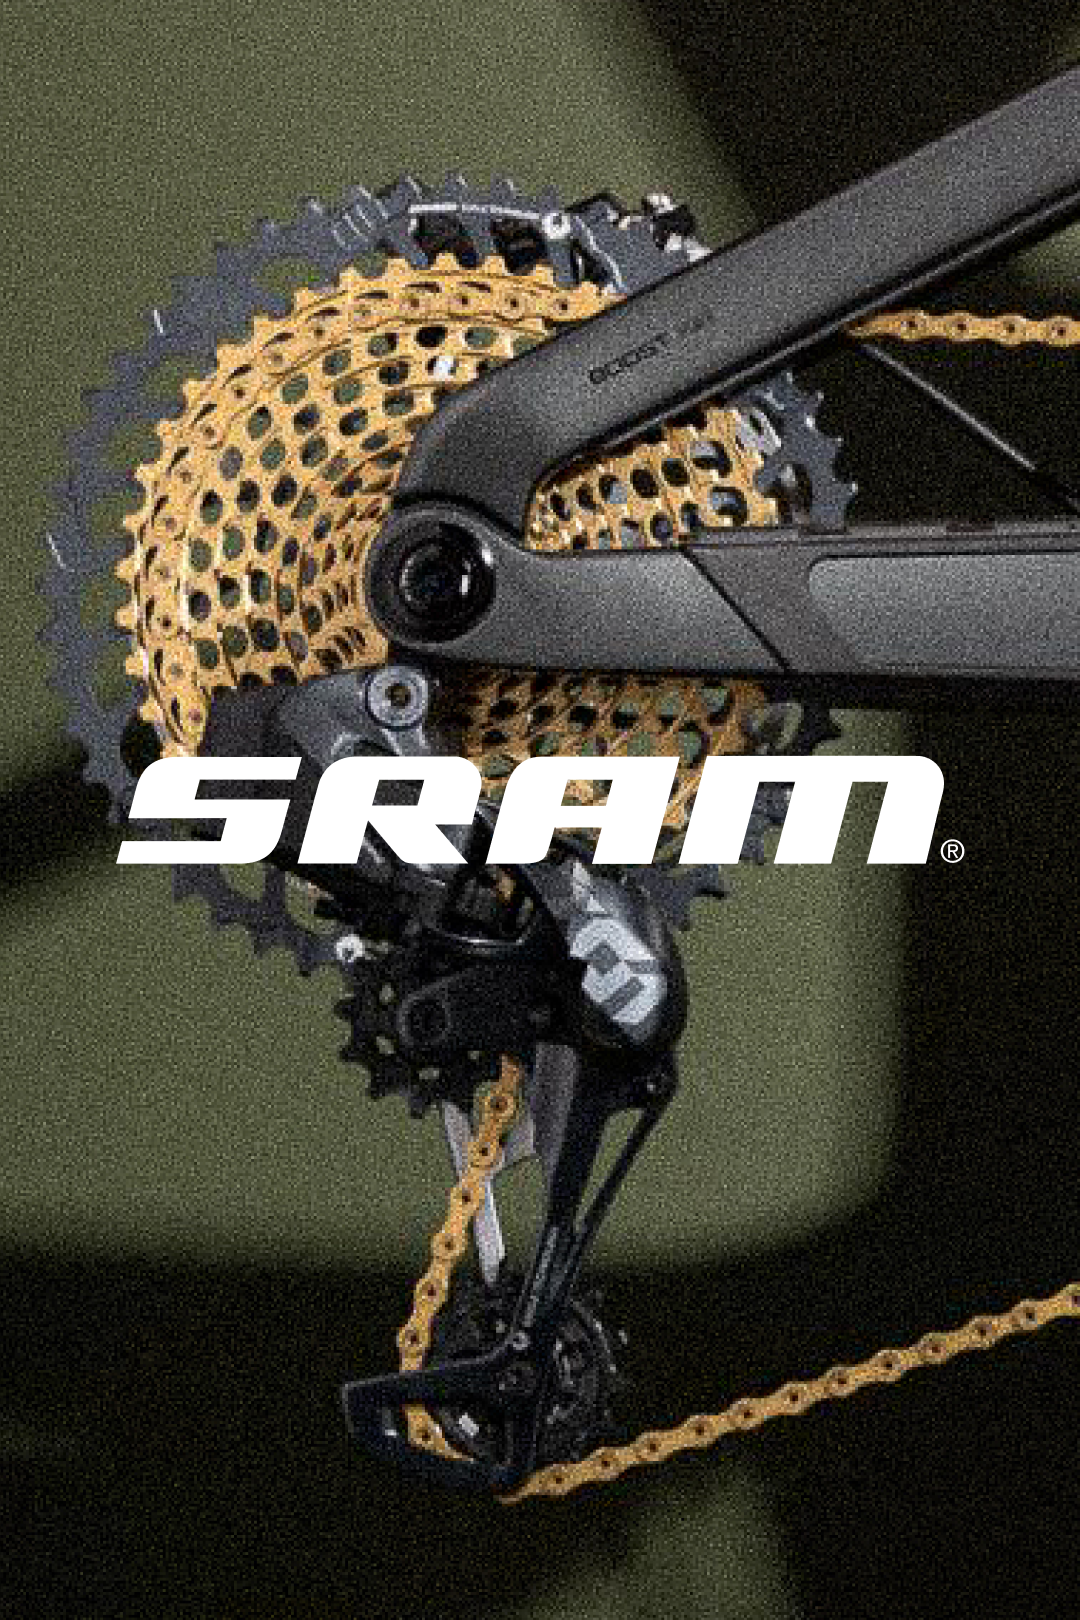 Close-up of a SRAM rear derailleur and cassette on a bicycle, showcasing the intricate engineering @ Bici.